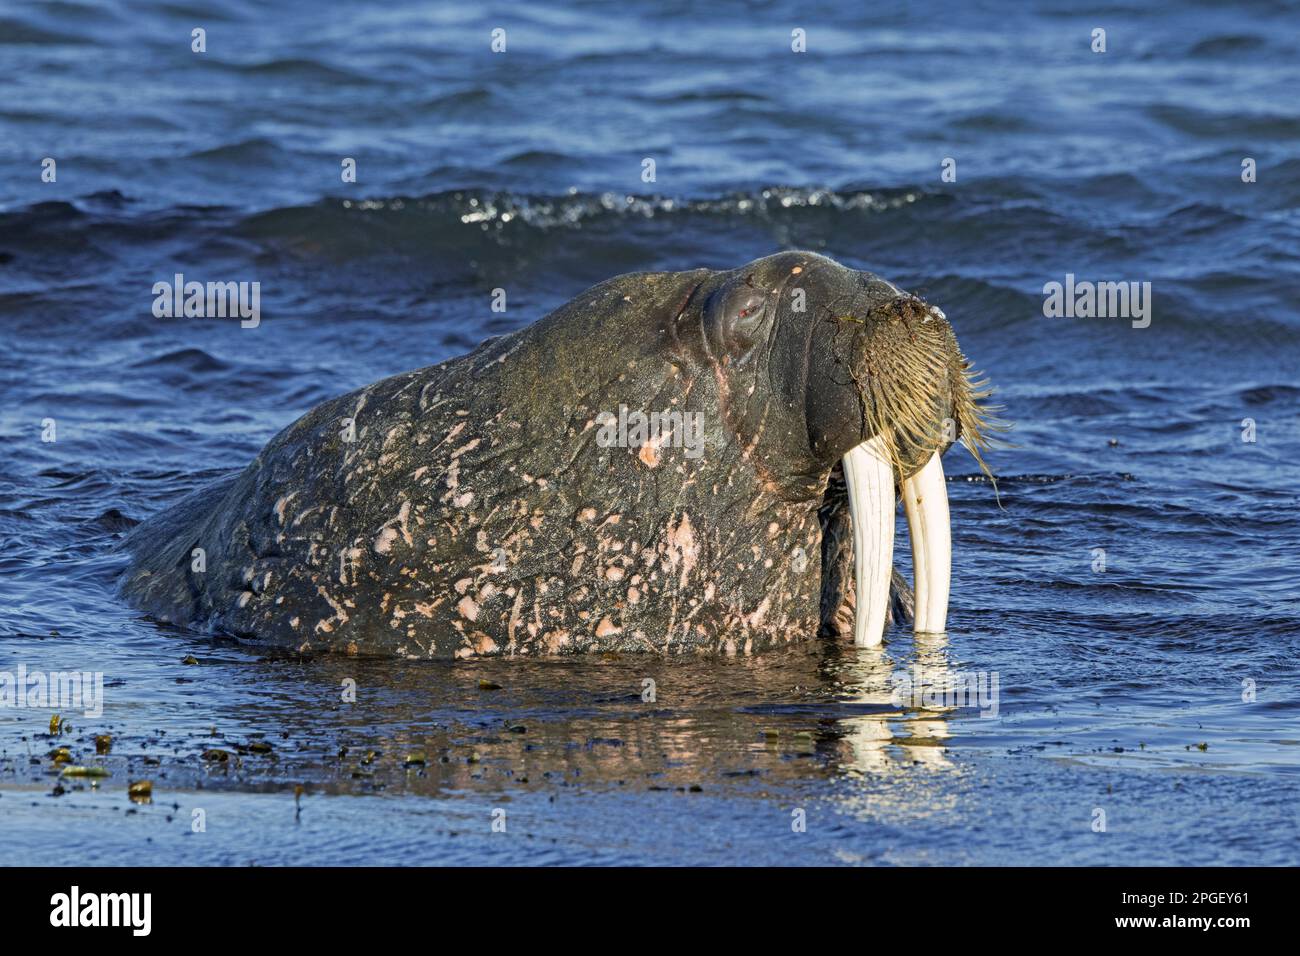 Walrus (Odobenus rosmarus) male / bull covered in scars with big tusks swimming in the Arctic Ocean, Svalbard / Spitsbergen, Norway Stock Photo